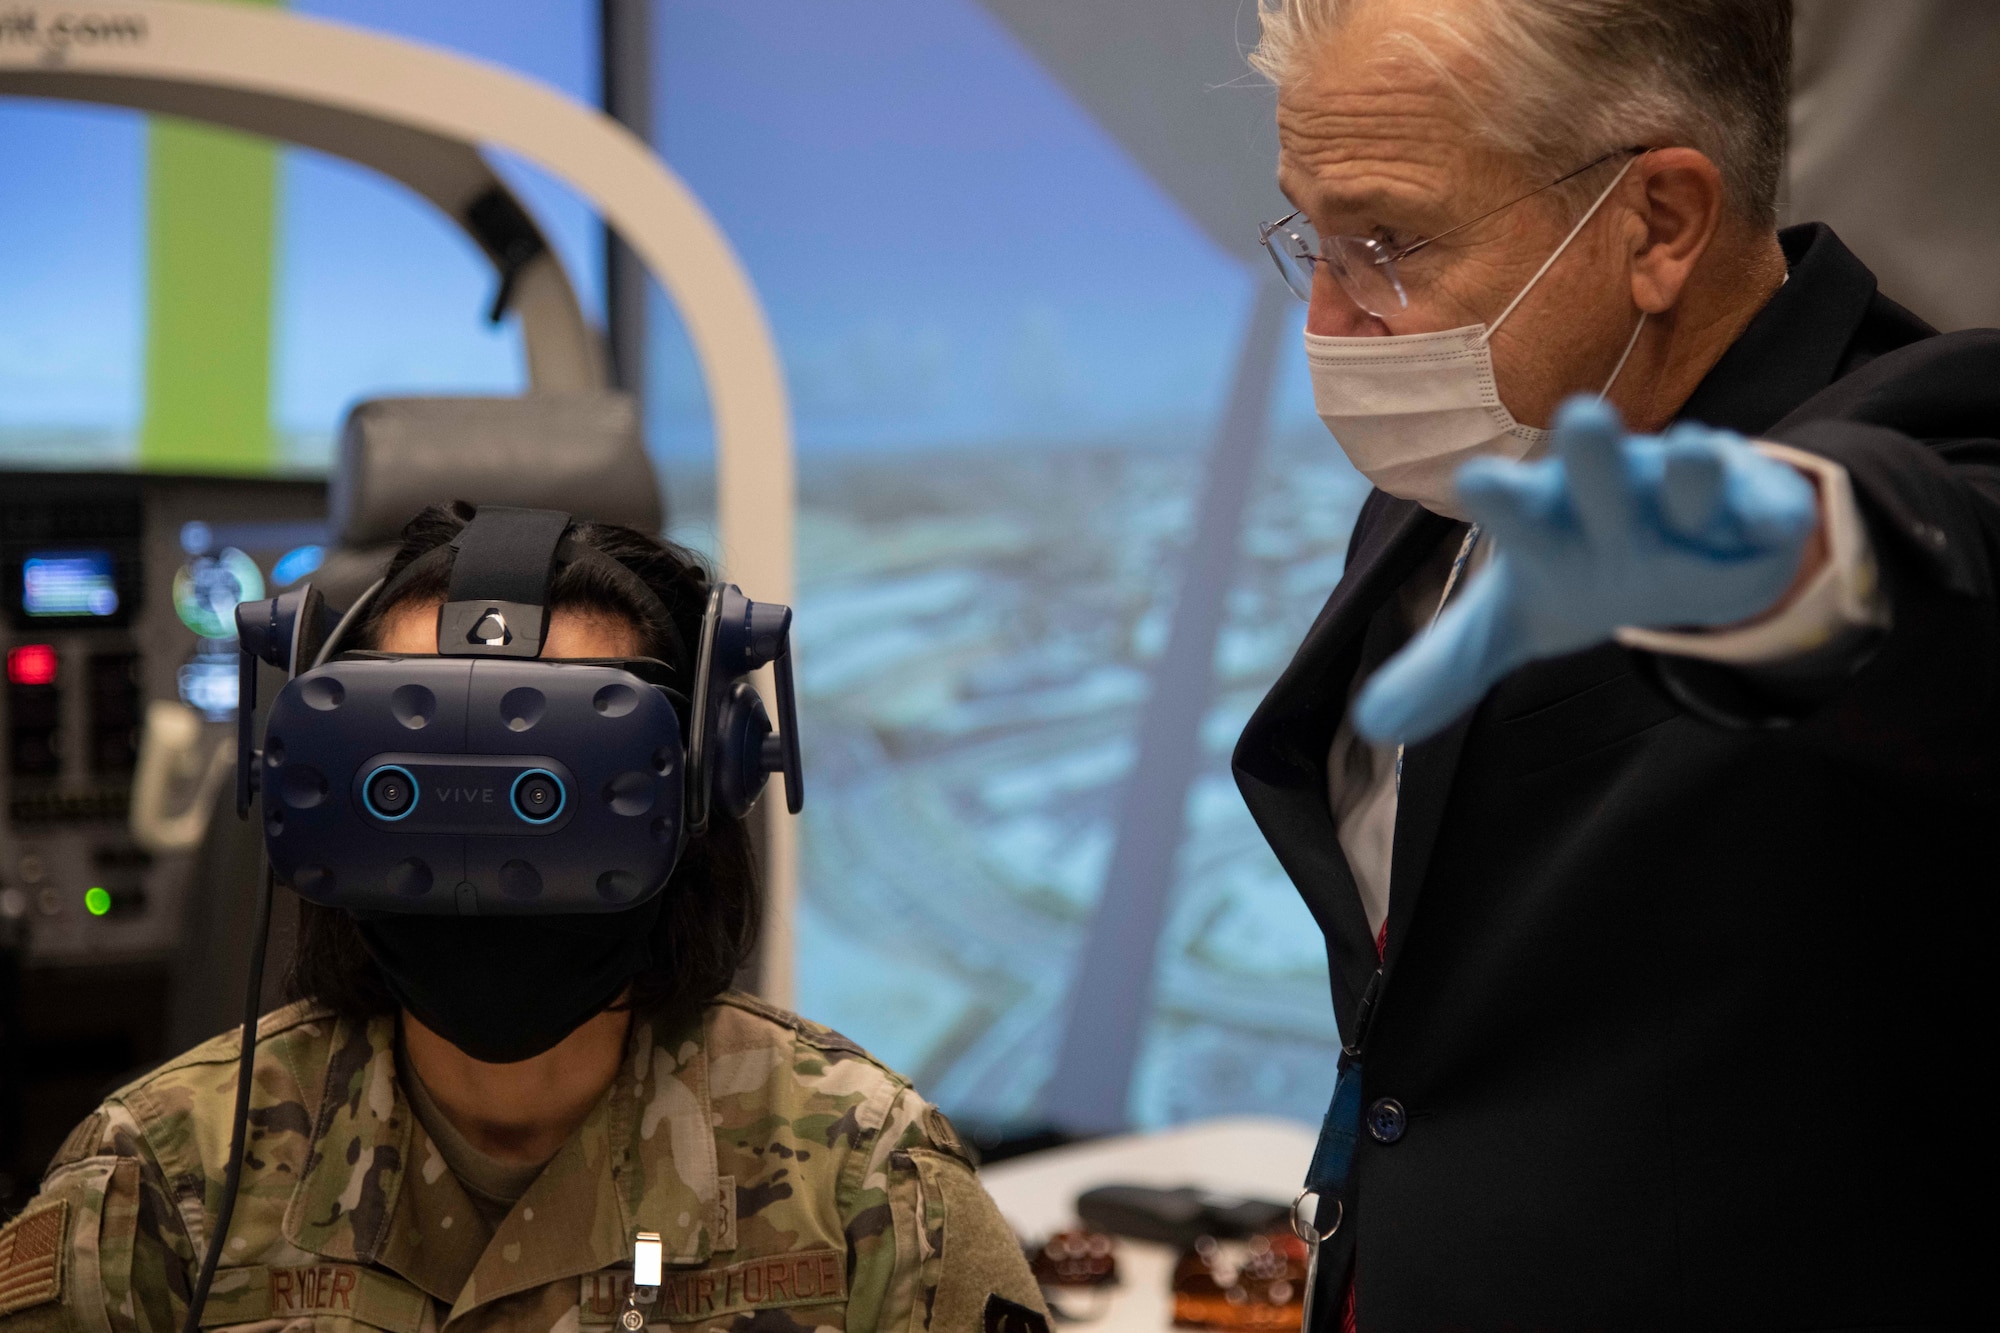 U.S. Air Force Brig. Gen. Jeannine M. Ryder, Commander, 711th Human Performance Wing, receives instruction on the virtual reality headset from Dr. Leon N. McLin, Senior Research Optometrist and Vision Scientist in the Optical Radiation Bioeffects Branch of the Airman Systems Directorate, during a tour of the Tri-services Research Laboratory (TSRL) on Joint Base San Antonio Fort Sam Houston, Texas, Nov. 5, 2020. The new 181,000-square-foot TSRL houses Navy, Air Force and Army research programs. (U.S. Air Force Photo/Jose A. Torres Jr.)